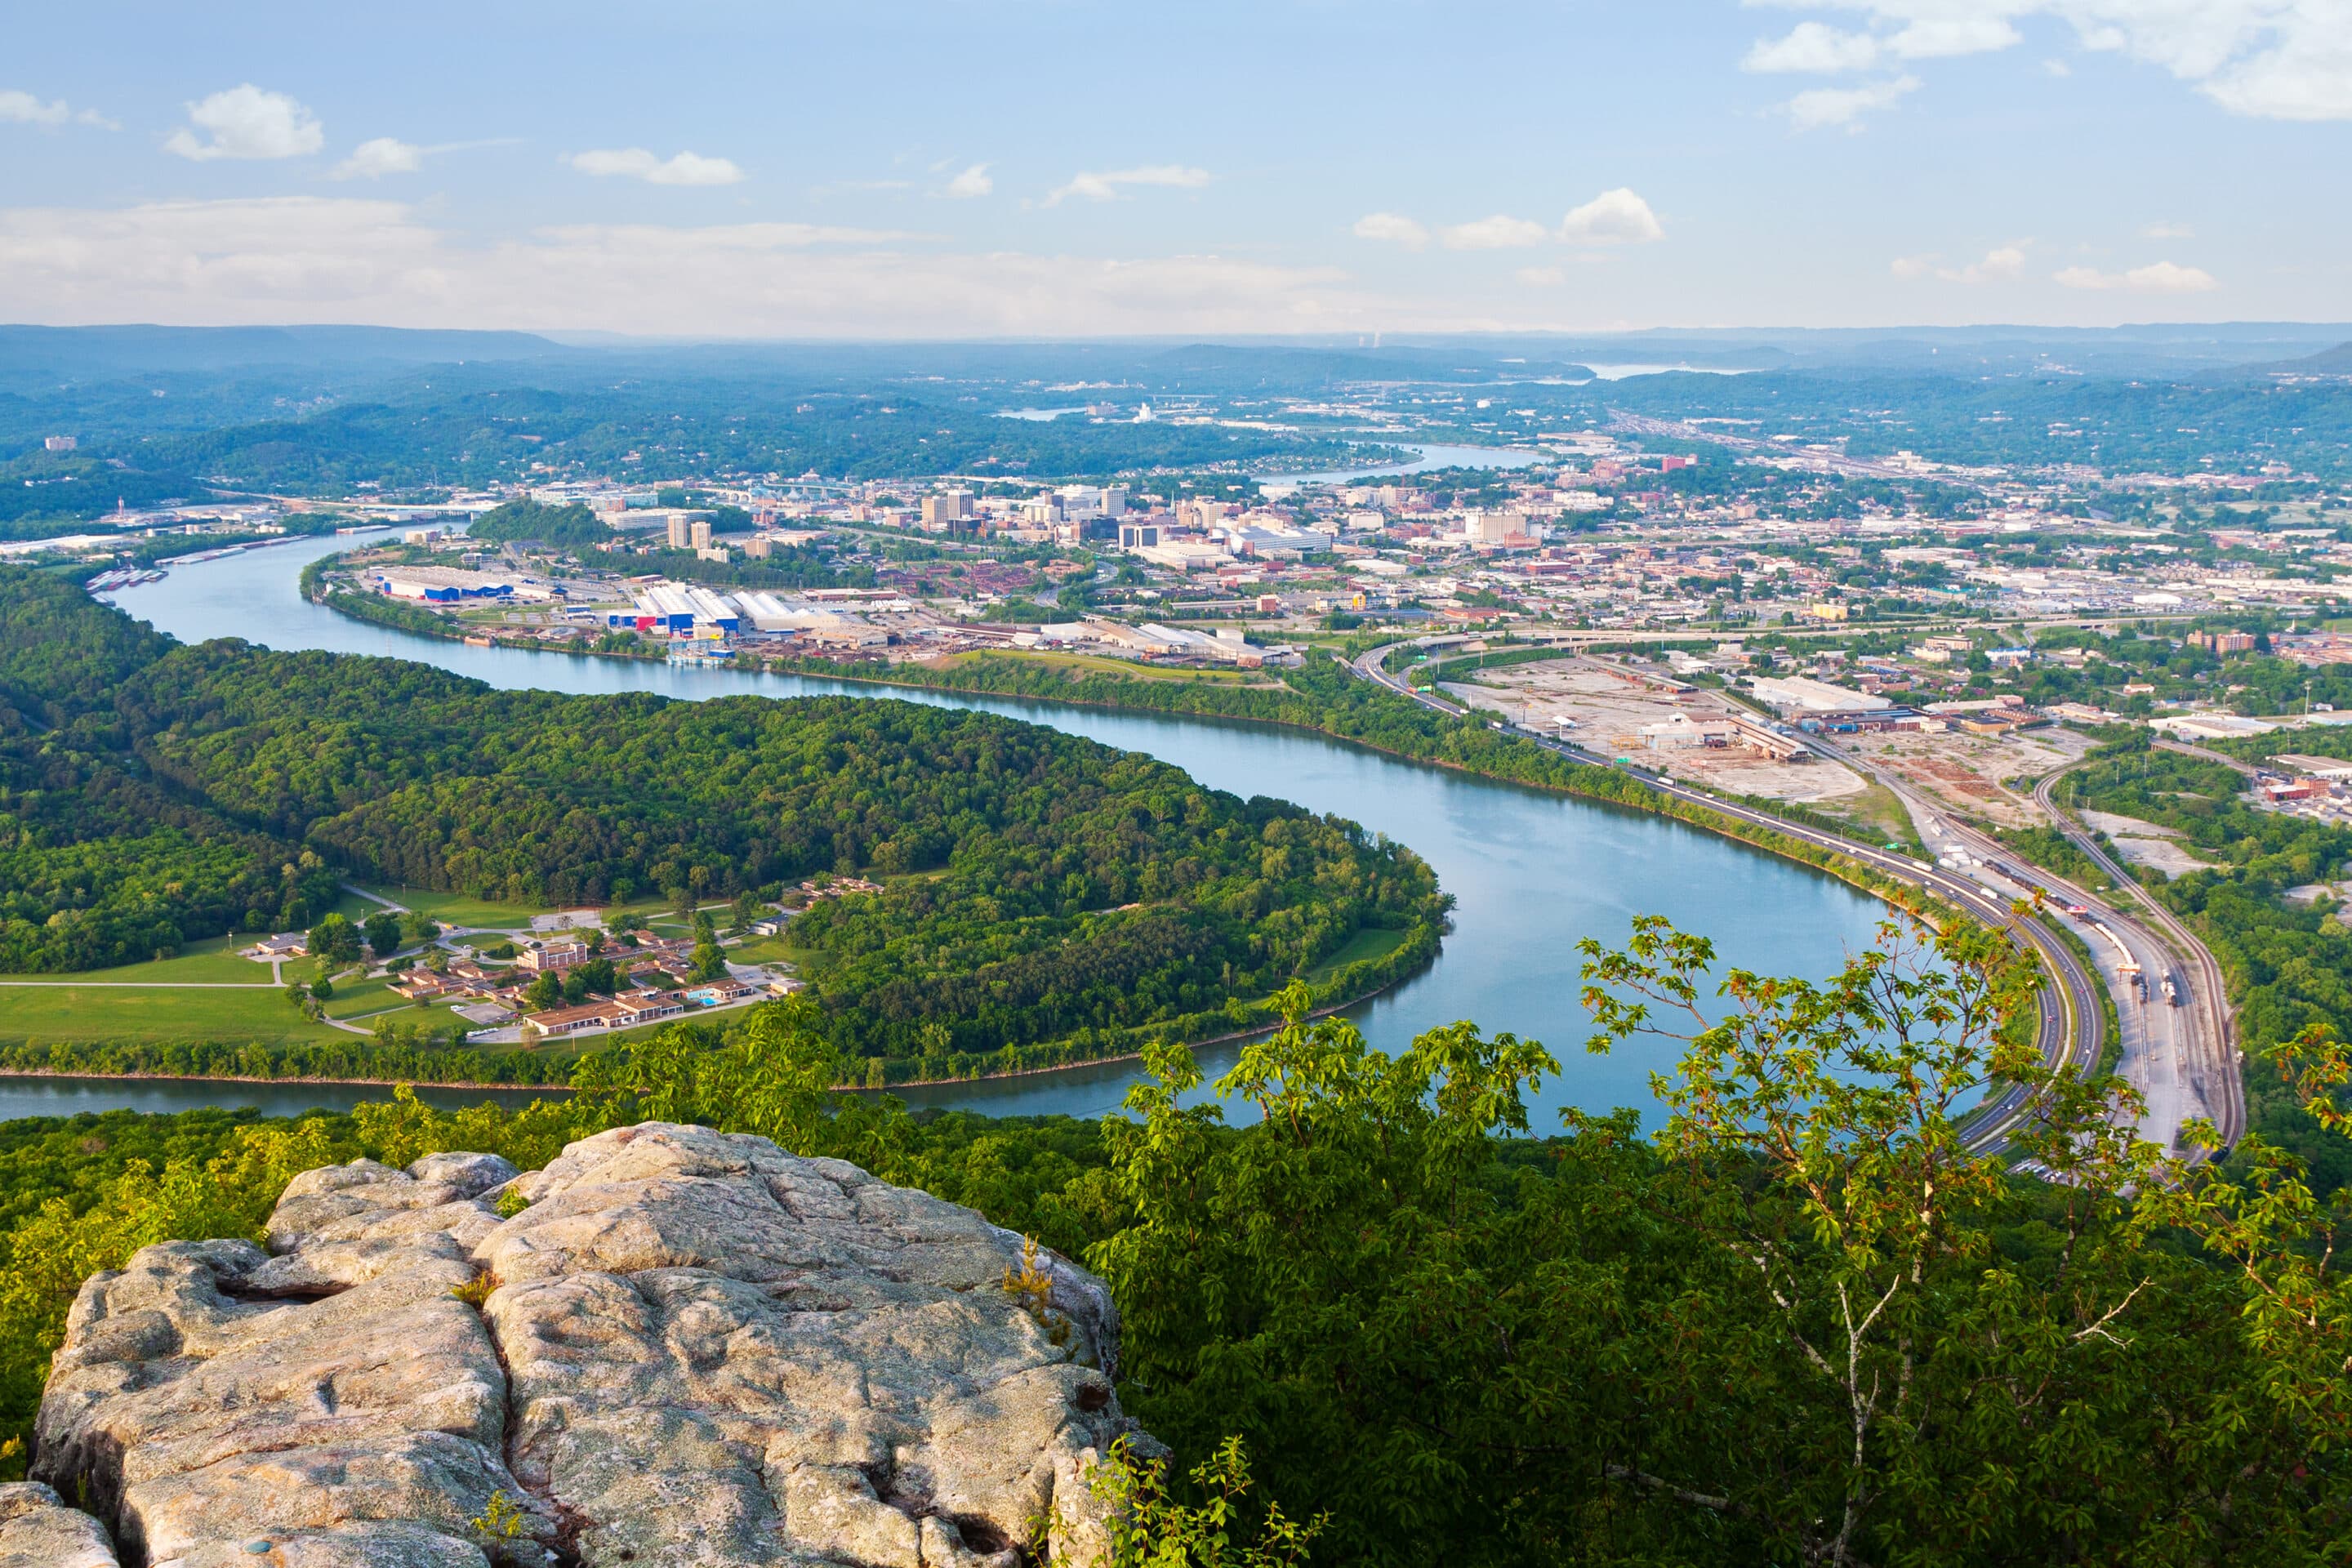 Aerial view of Chattanooga with the Tennessee River in view, stressing the importance of Tennessee flood insurance for riverside communities.